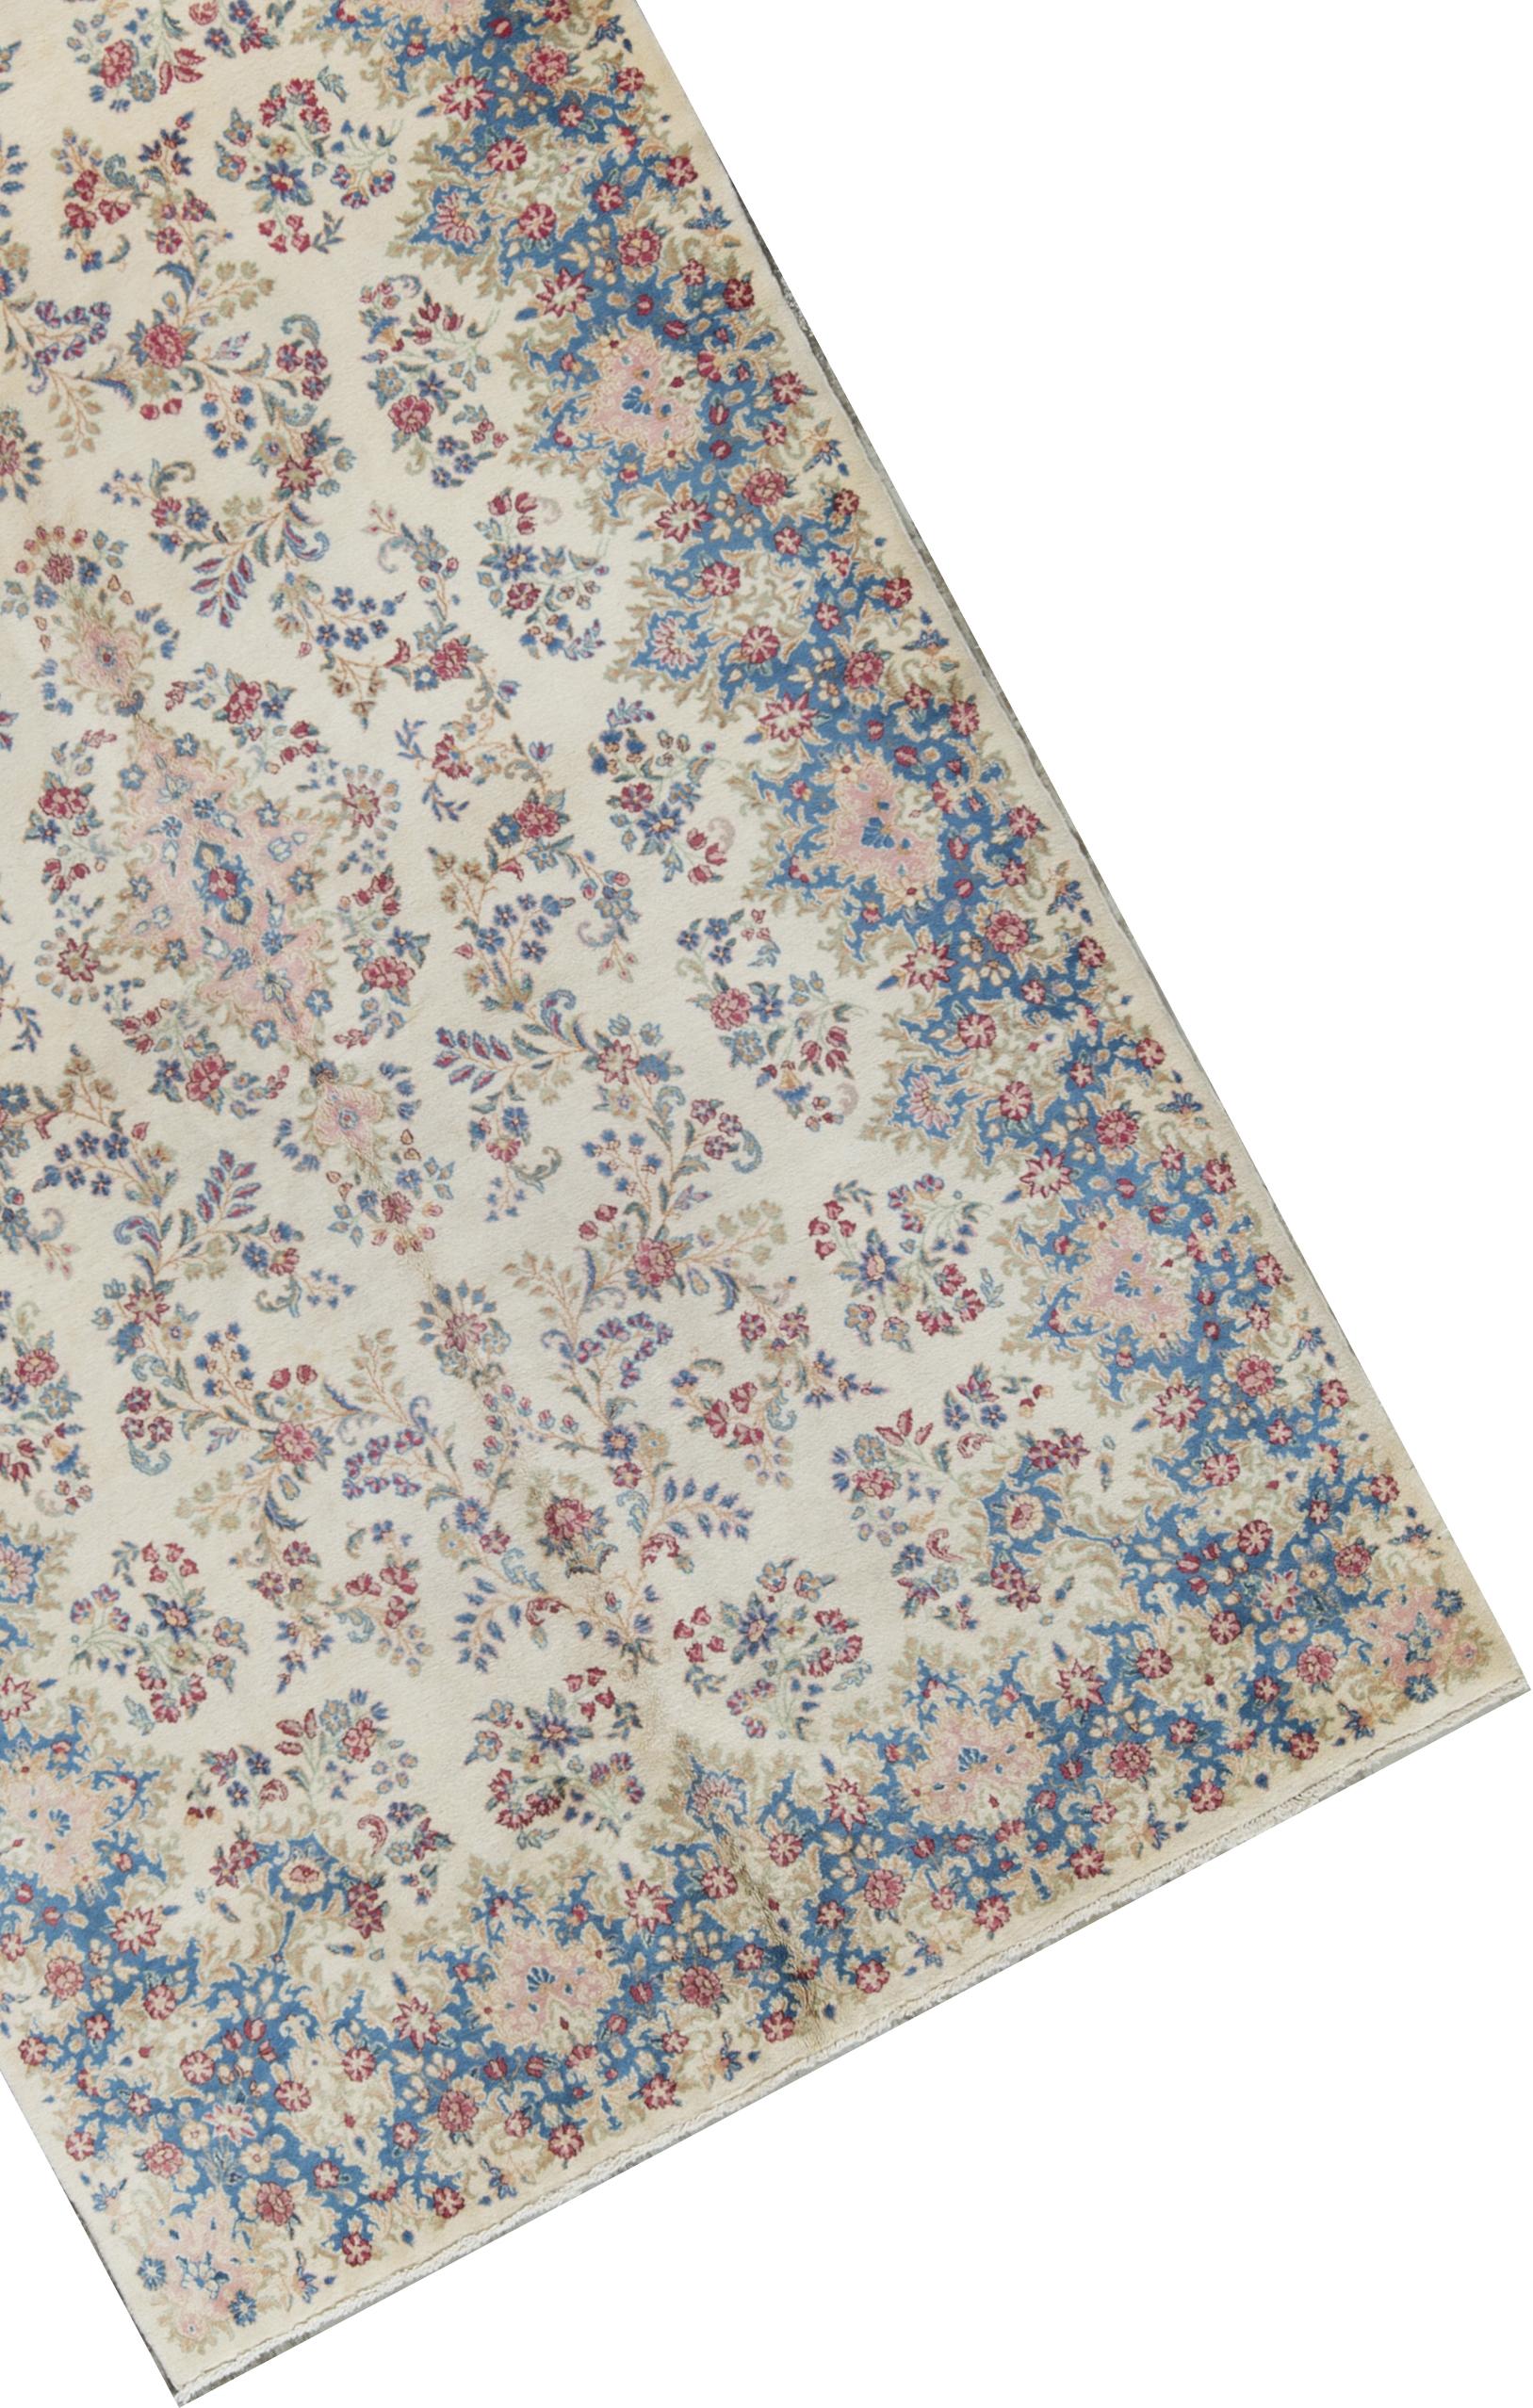 Vintage Persian Kerman rug, circa 1940. A vintage 1940s Kerman rug with an all-over design, the main ivory field with floral and vine designs encompassing the whole rug enclosed by an attractive border in the same style but incorporating a soft blue